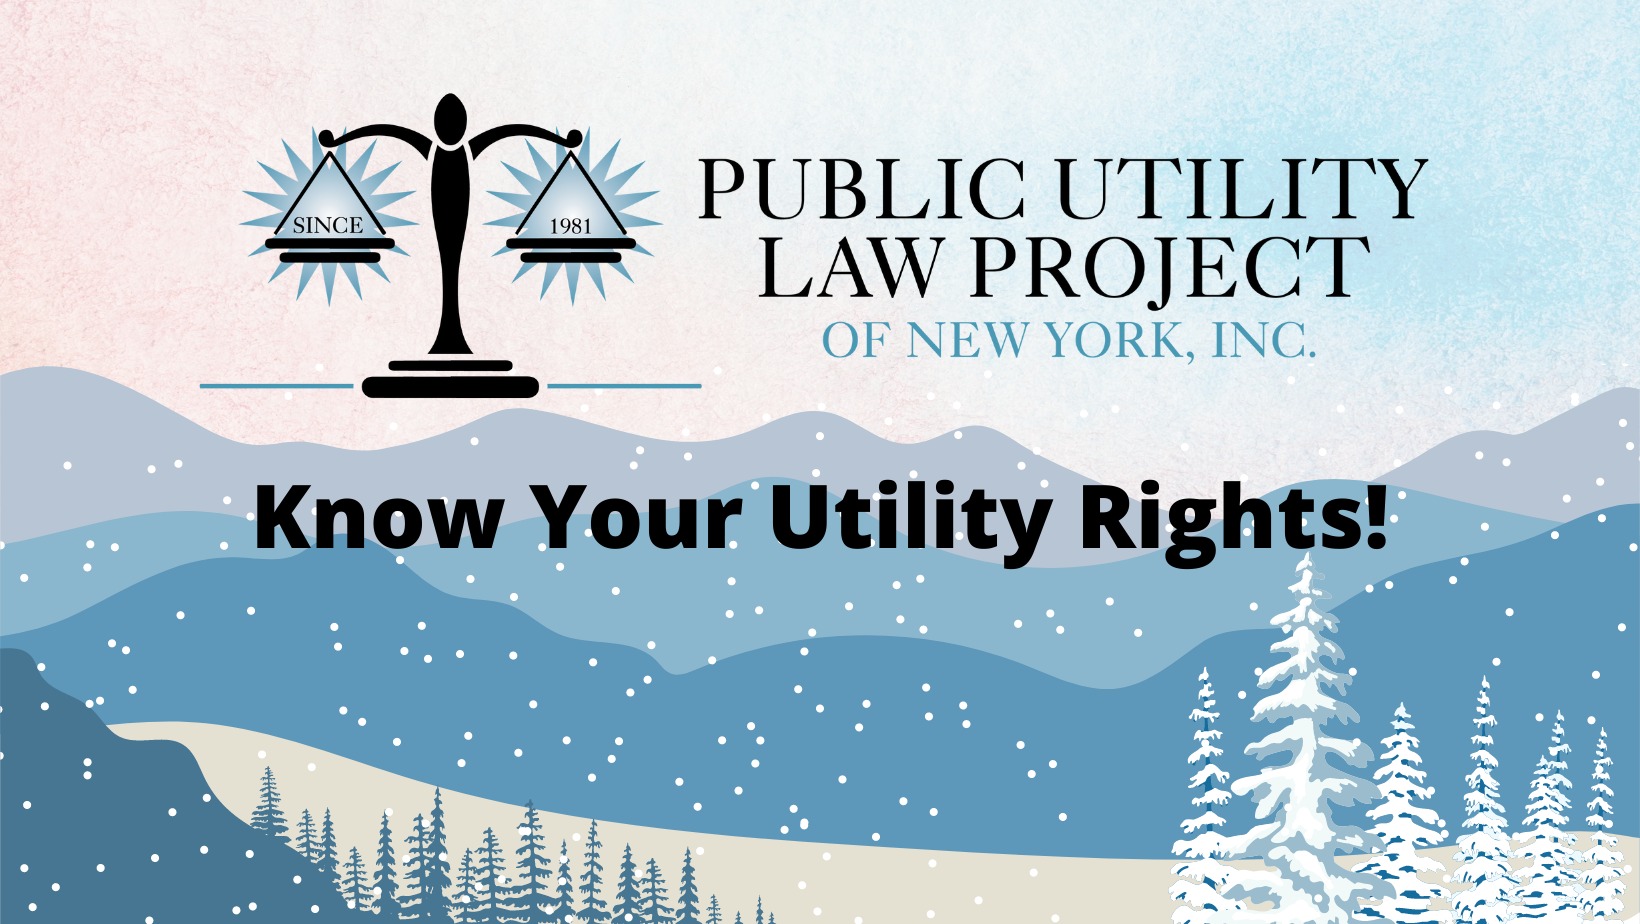 Flier reading "Know Your Utility Rights"